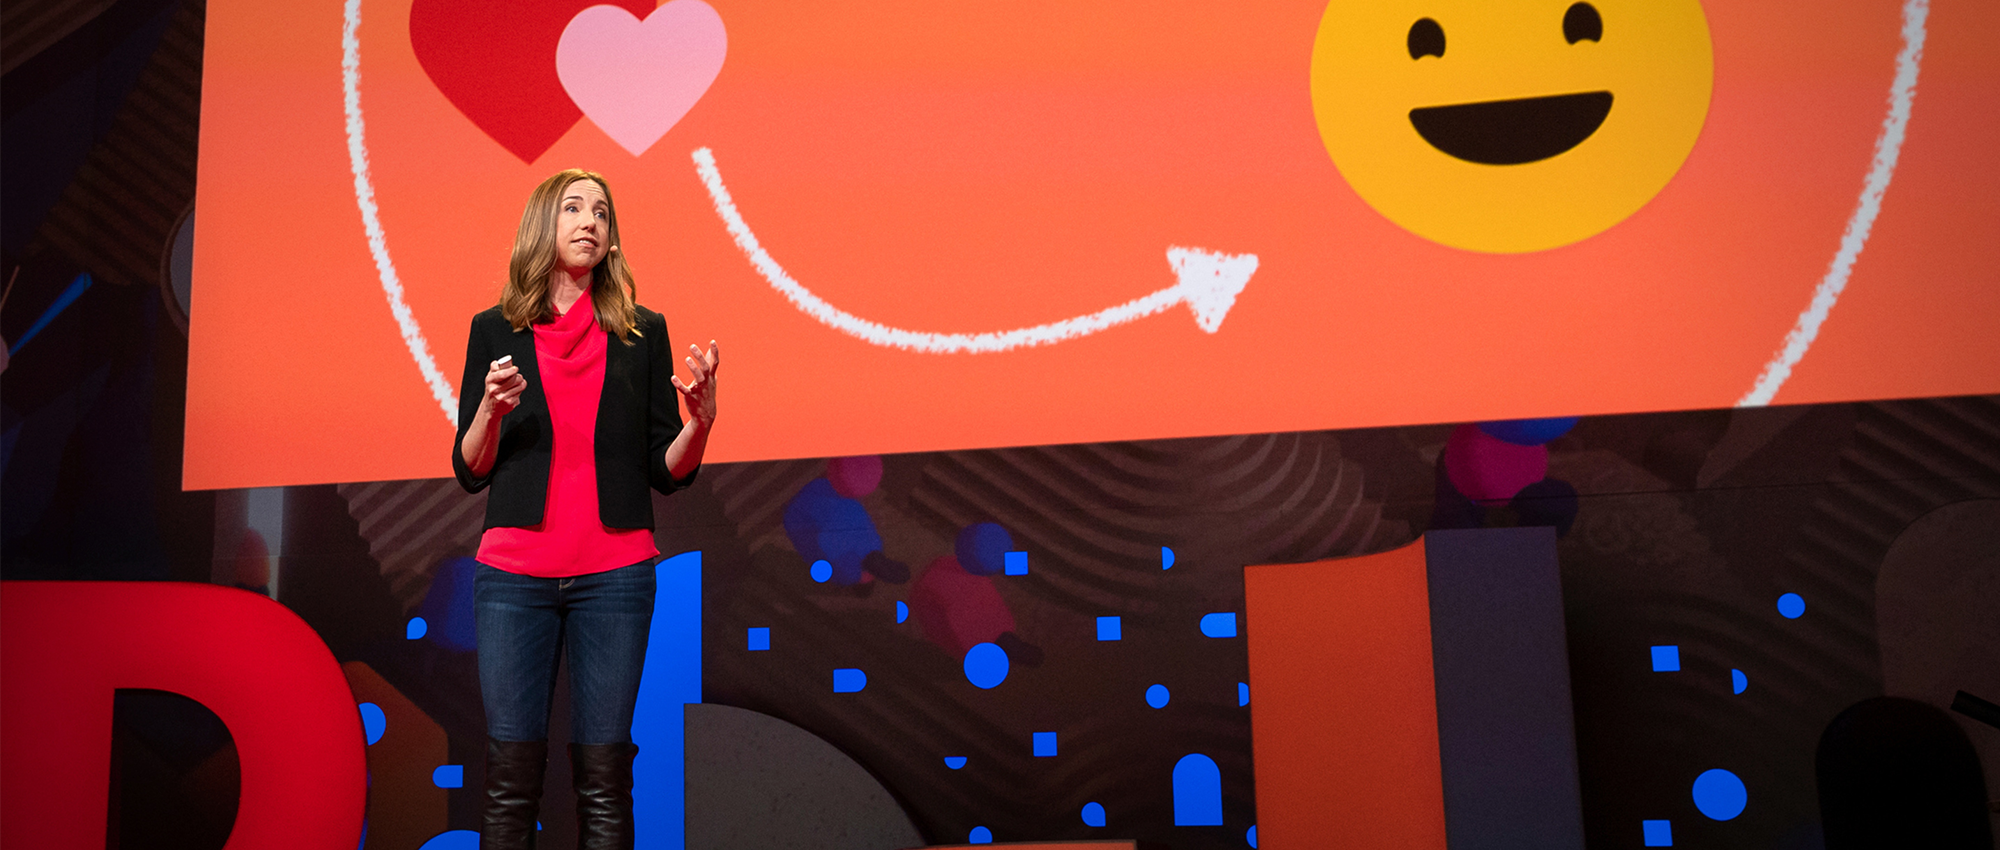 Elizabeth Dunn delivering her TED Talk in Vancouver on April 17, 2019. Photo: TED